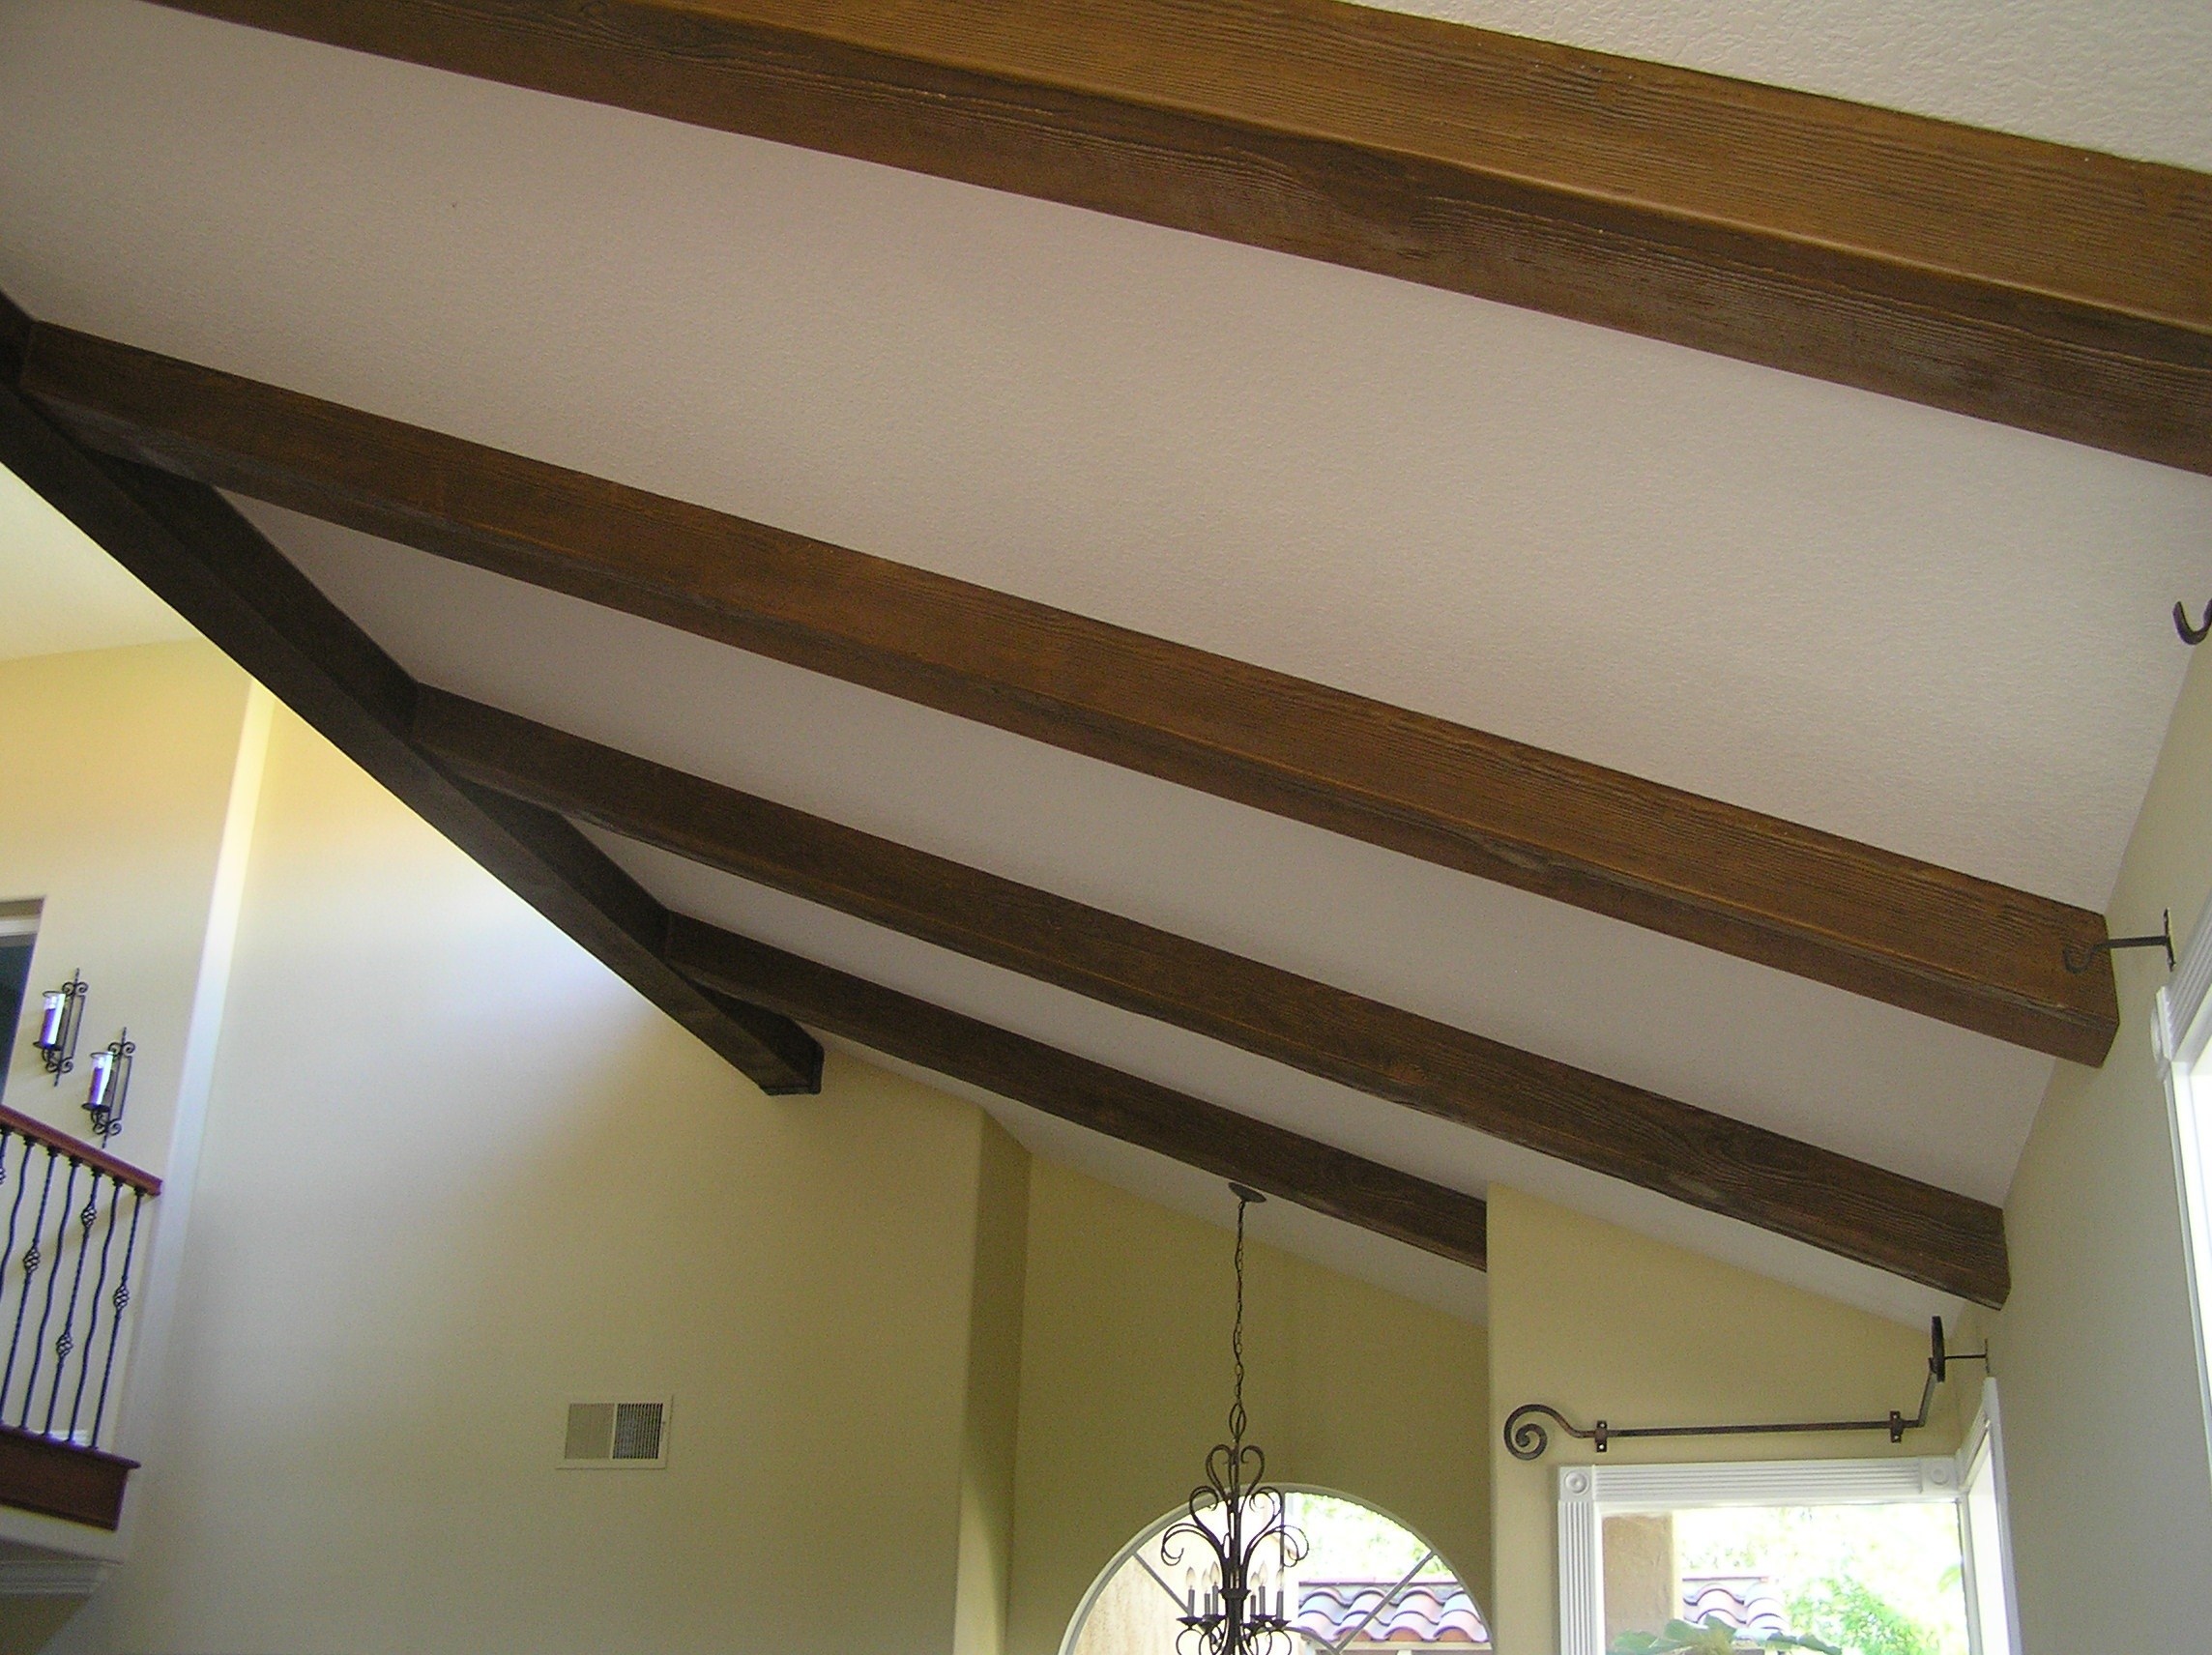 Fauxwoodbeams New Reclaimed Style Authentic Look Of